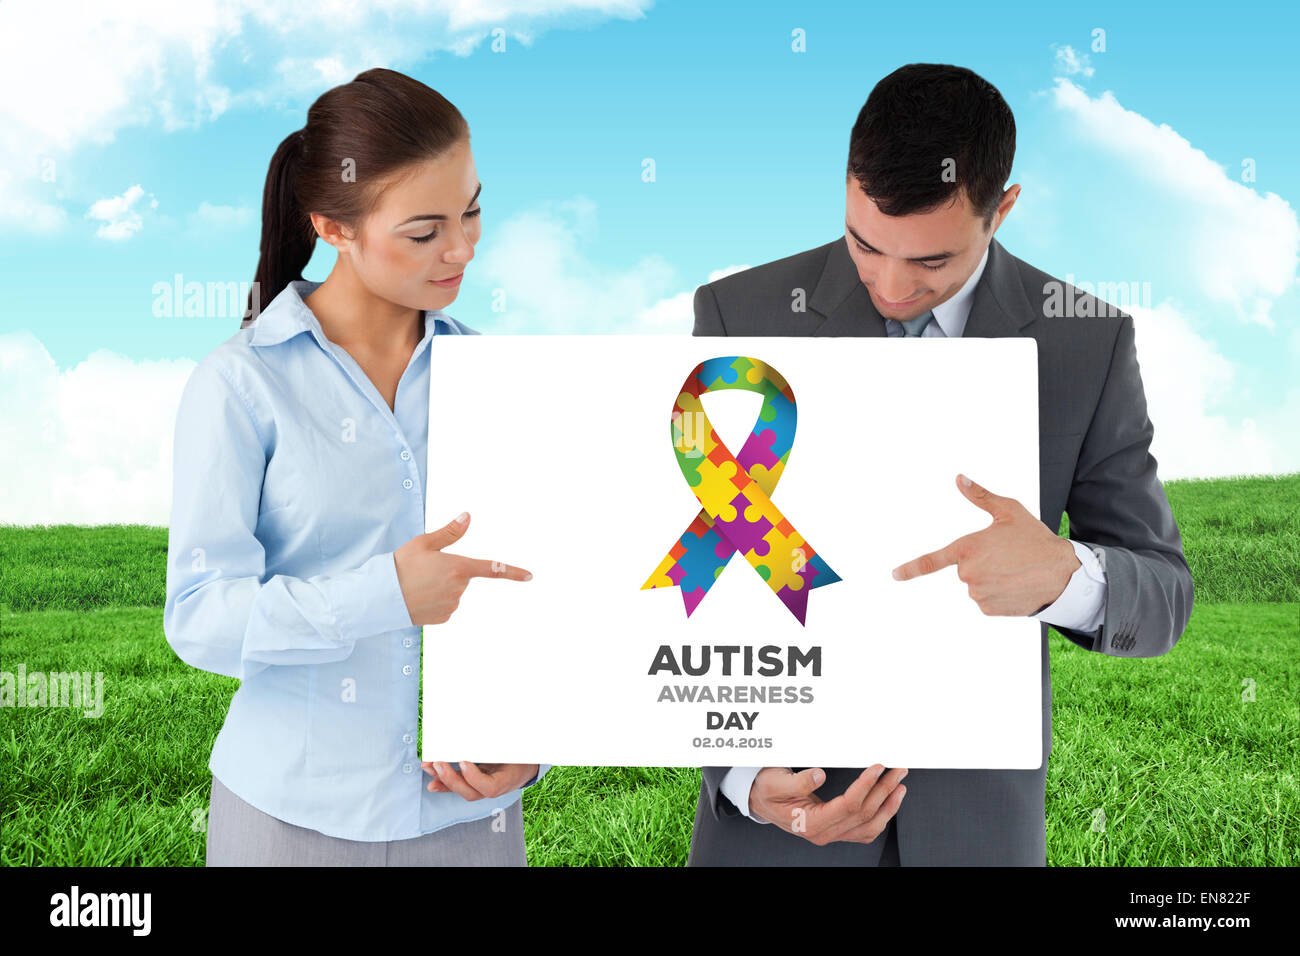 Composite image of business partners pointing at sign they are presenting Stock Photo